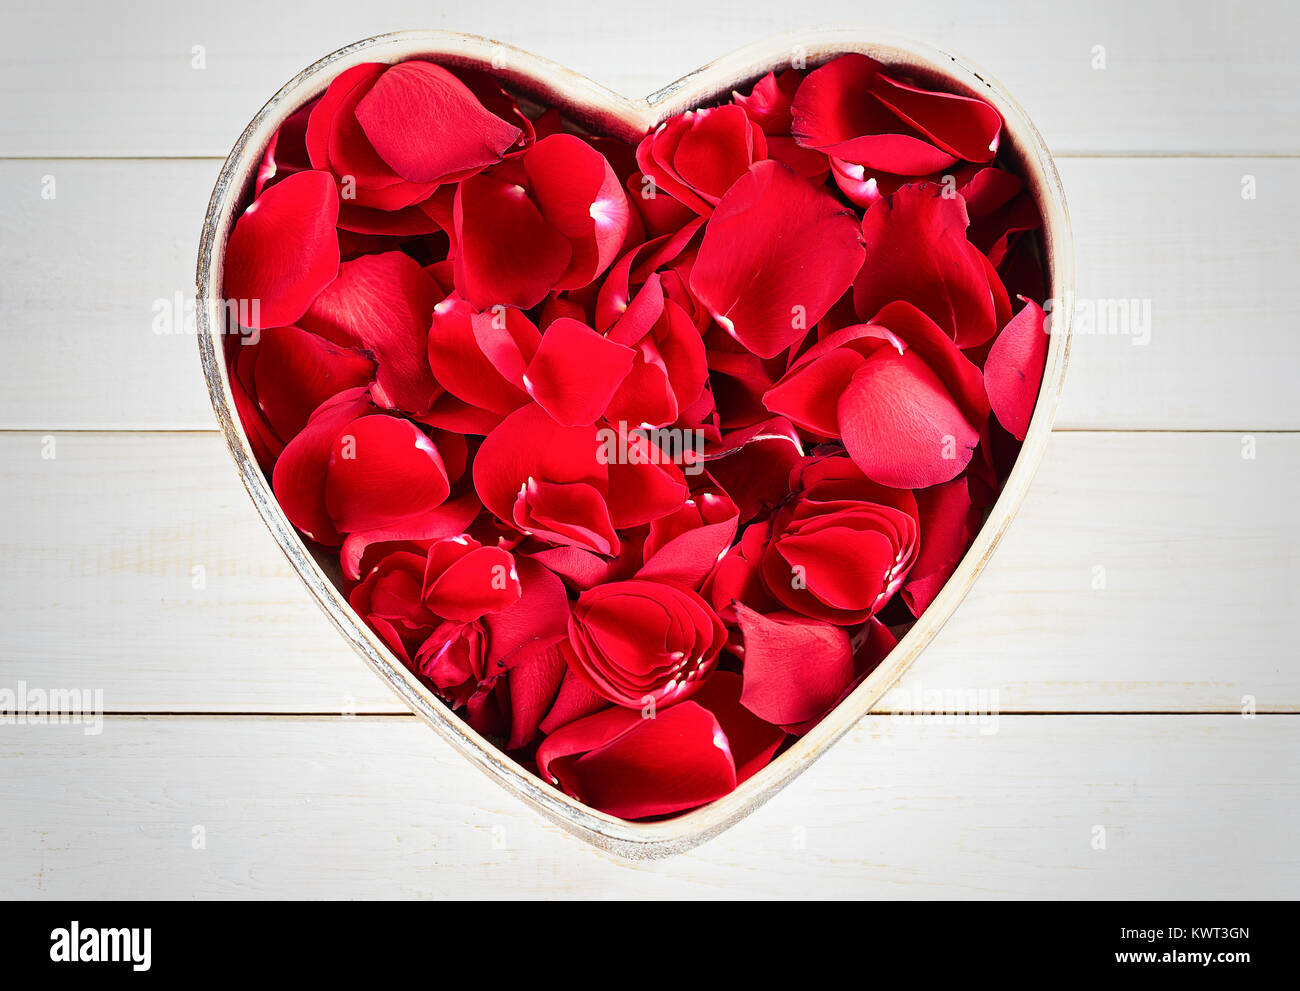 Red petals in heart-shaped tray Stock Photo